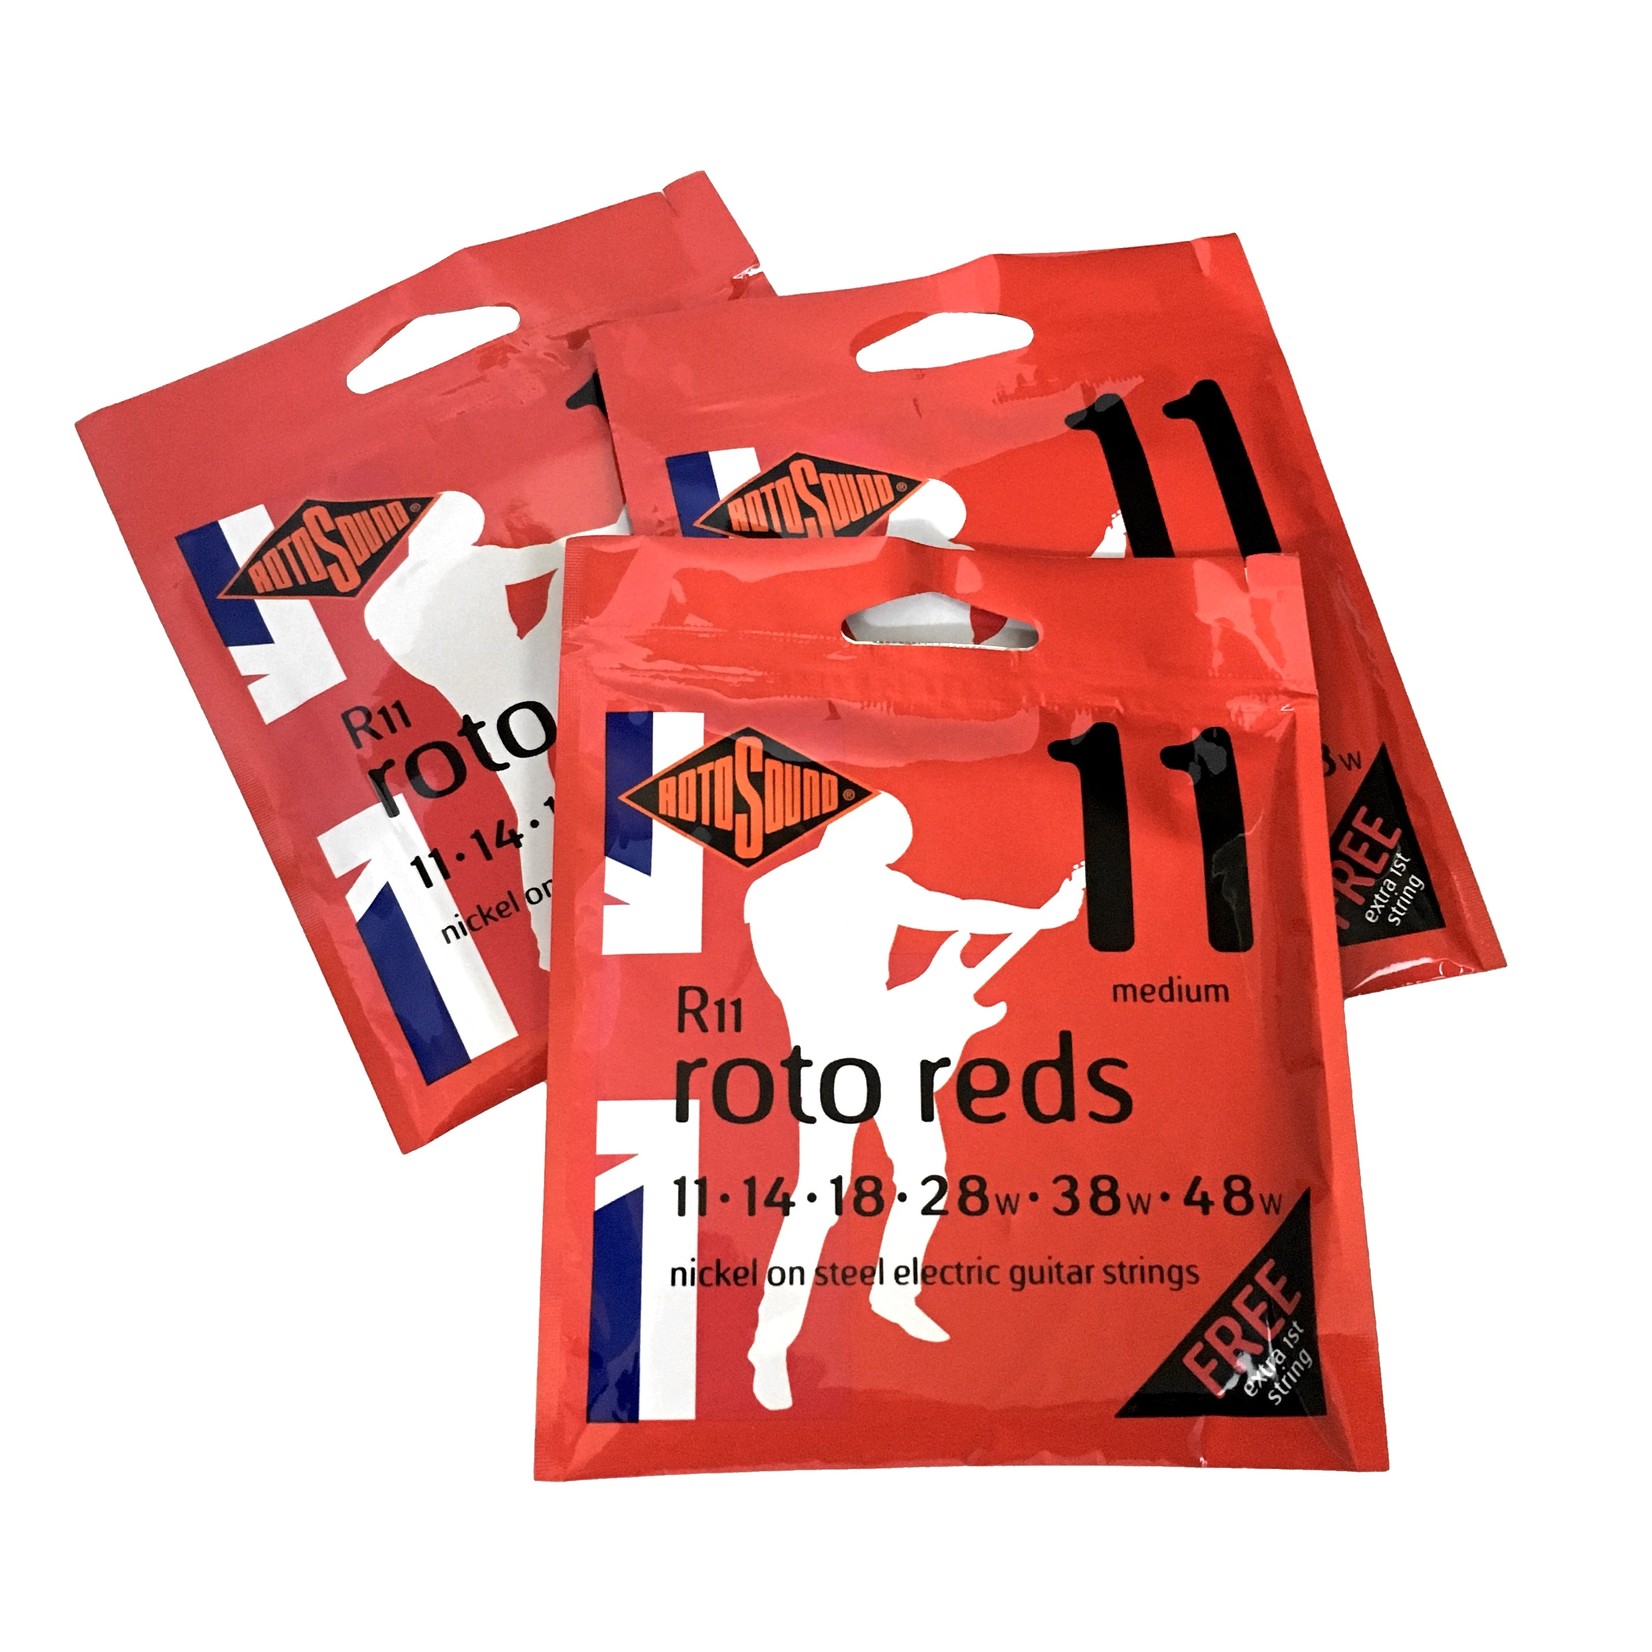 Rotosound 3x (three packs) Rotosound R11 Roto Reds Nickel on Steel Electric Guitar Strings